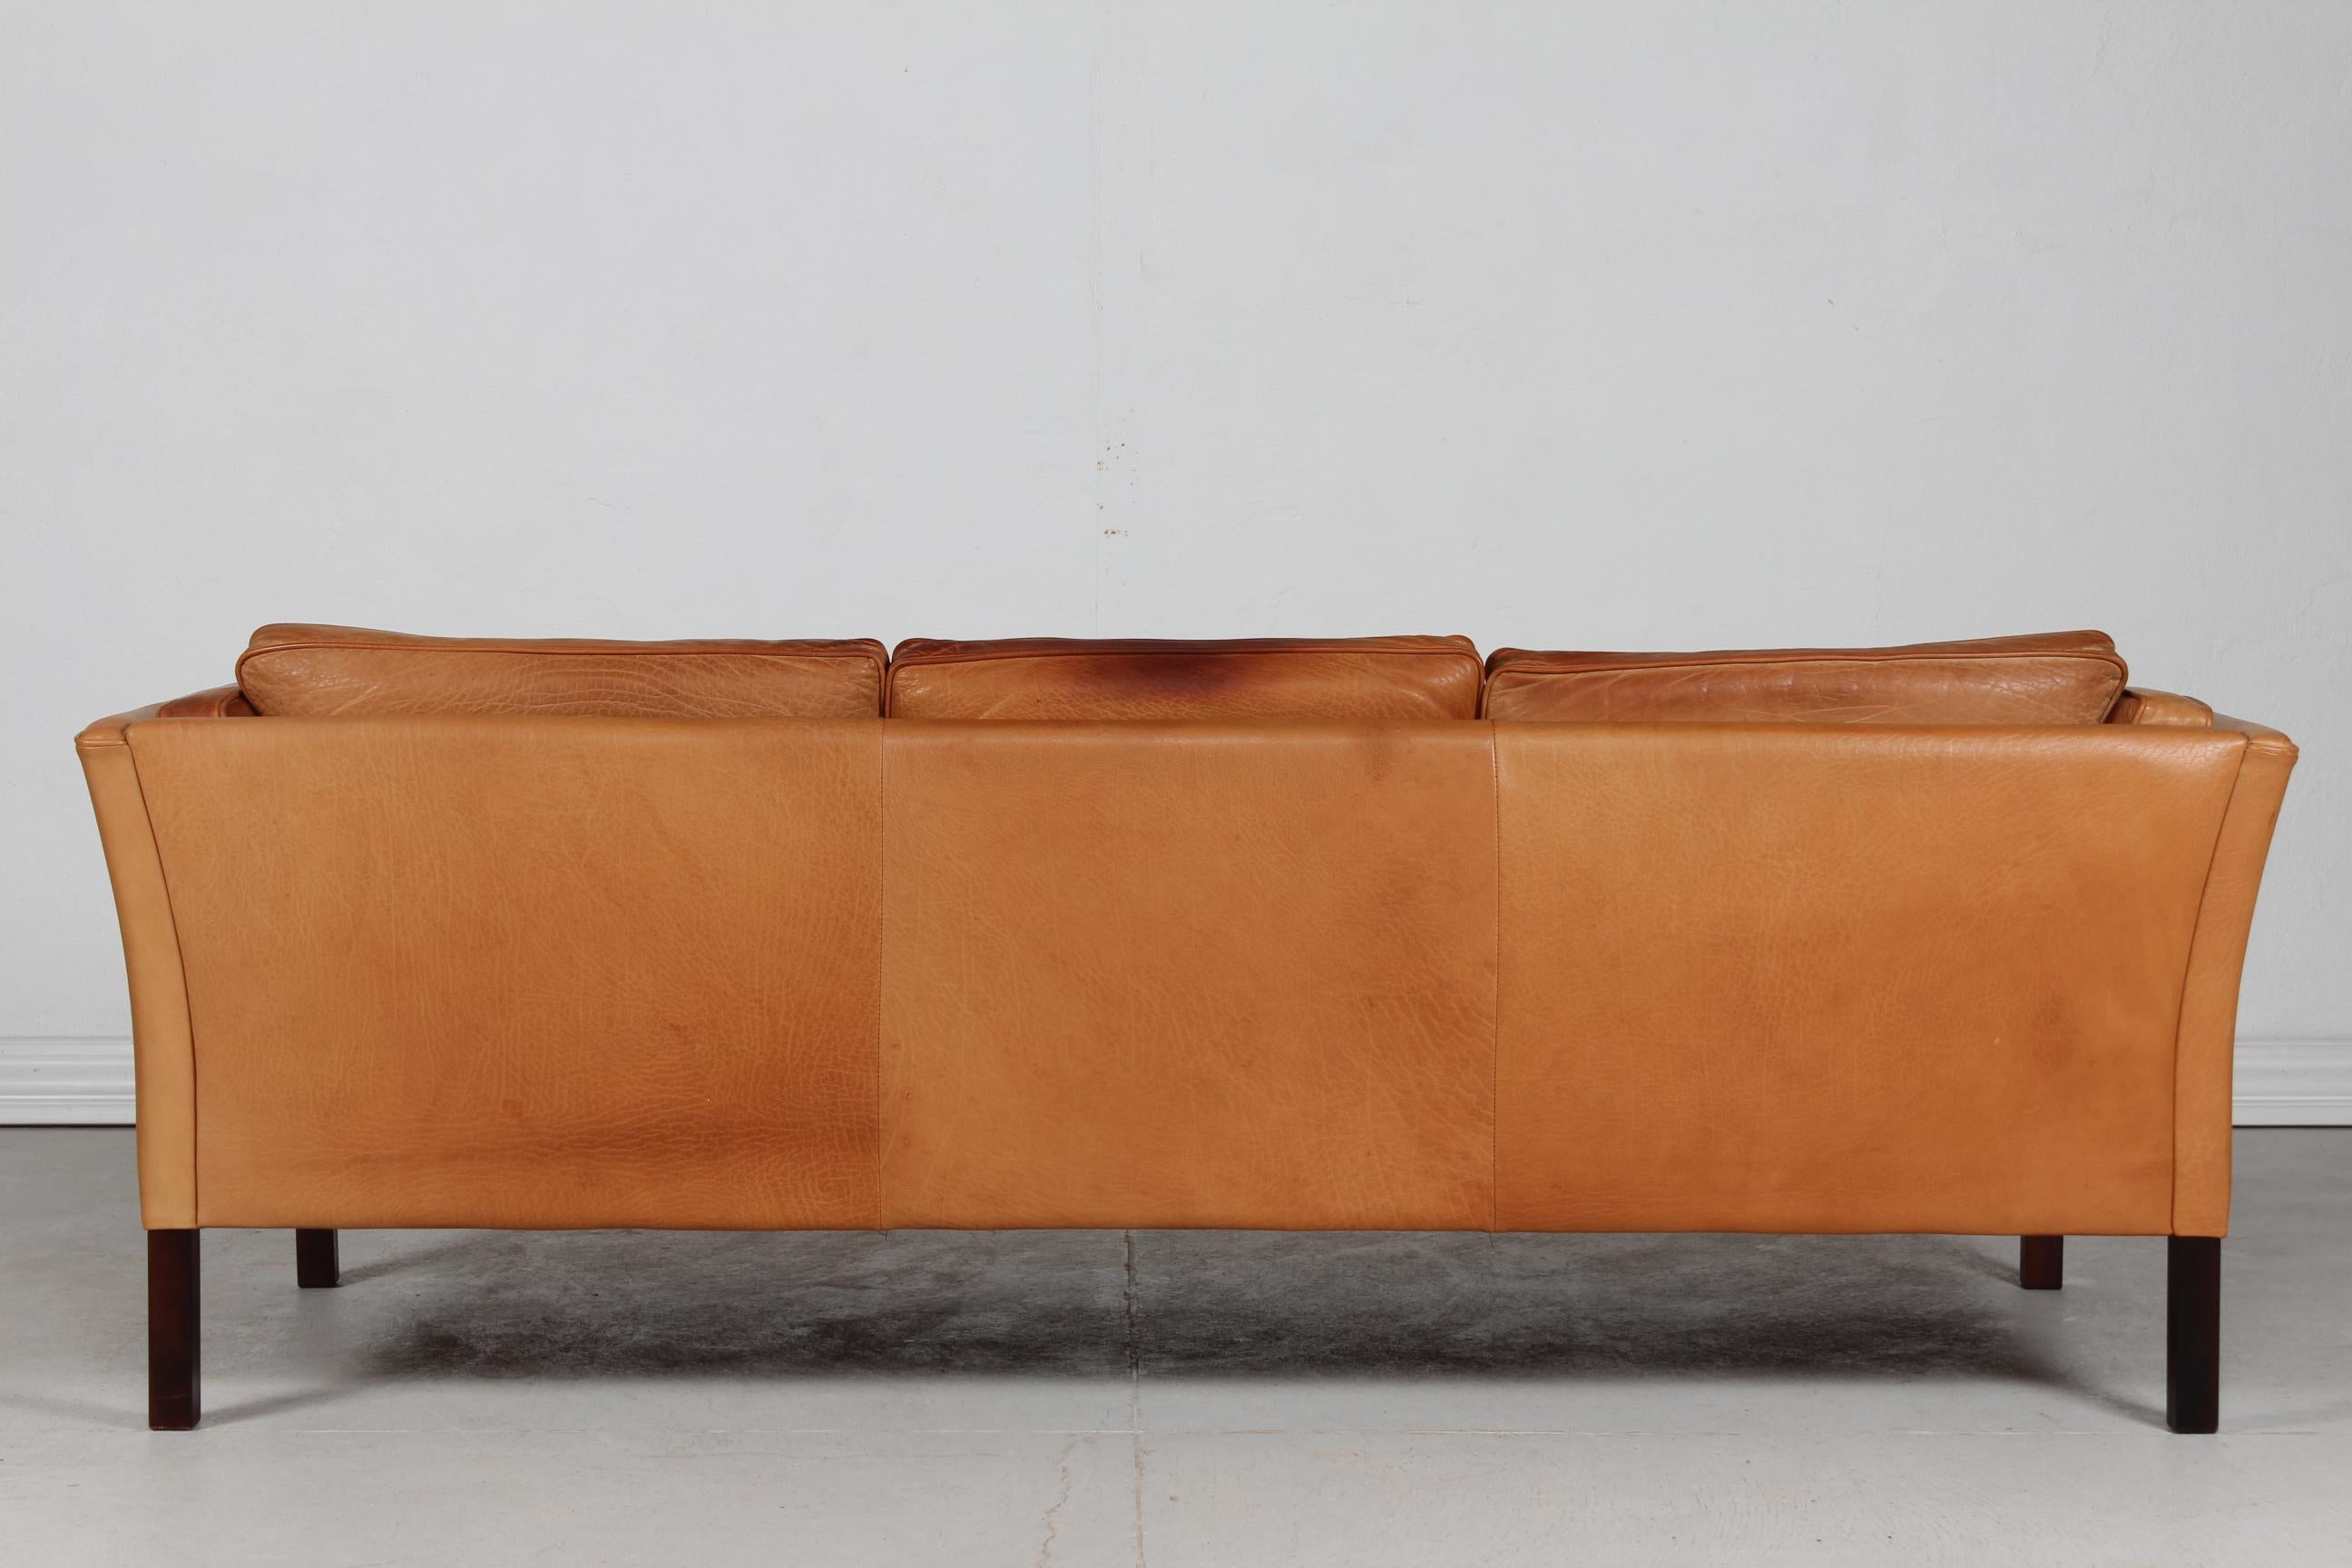 Danish Modern 3-Seat Sofa with Patinated Cognac-Colored Leather 1970s by Stouby 1